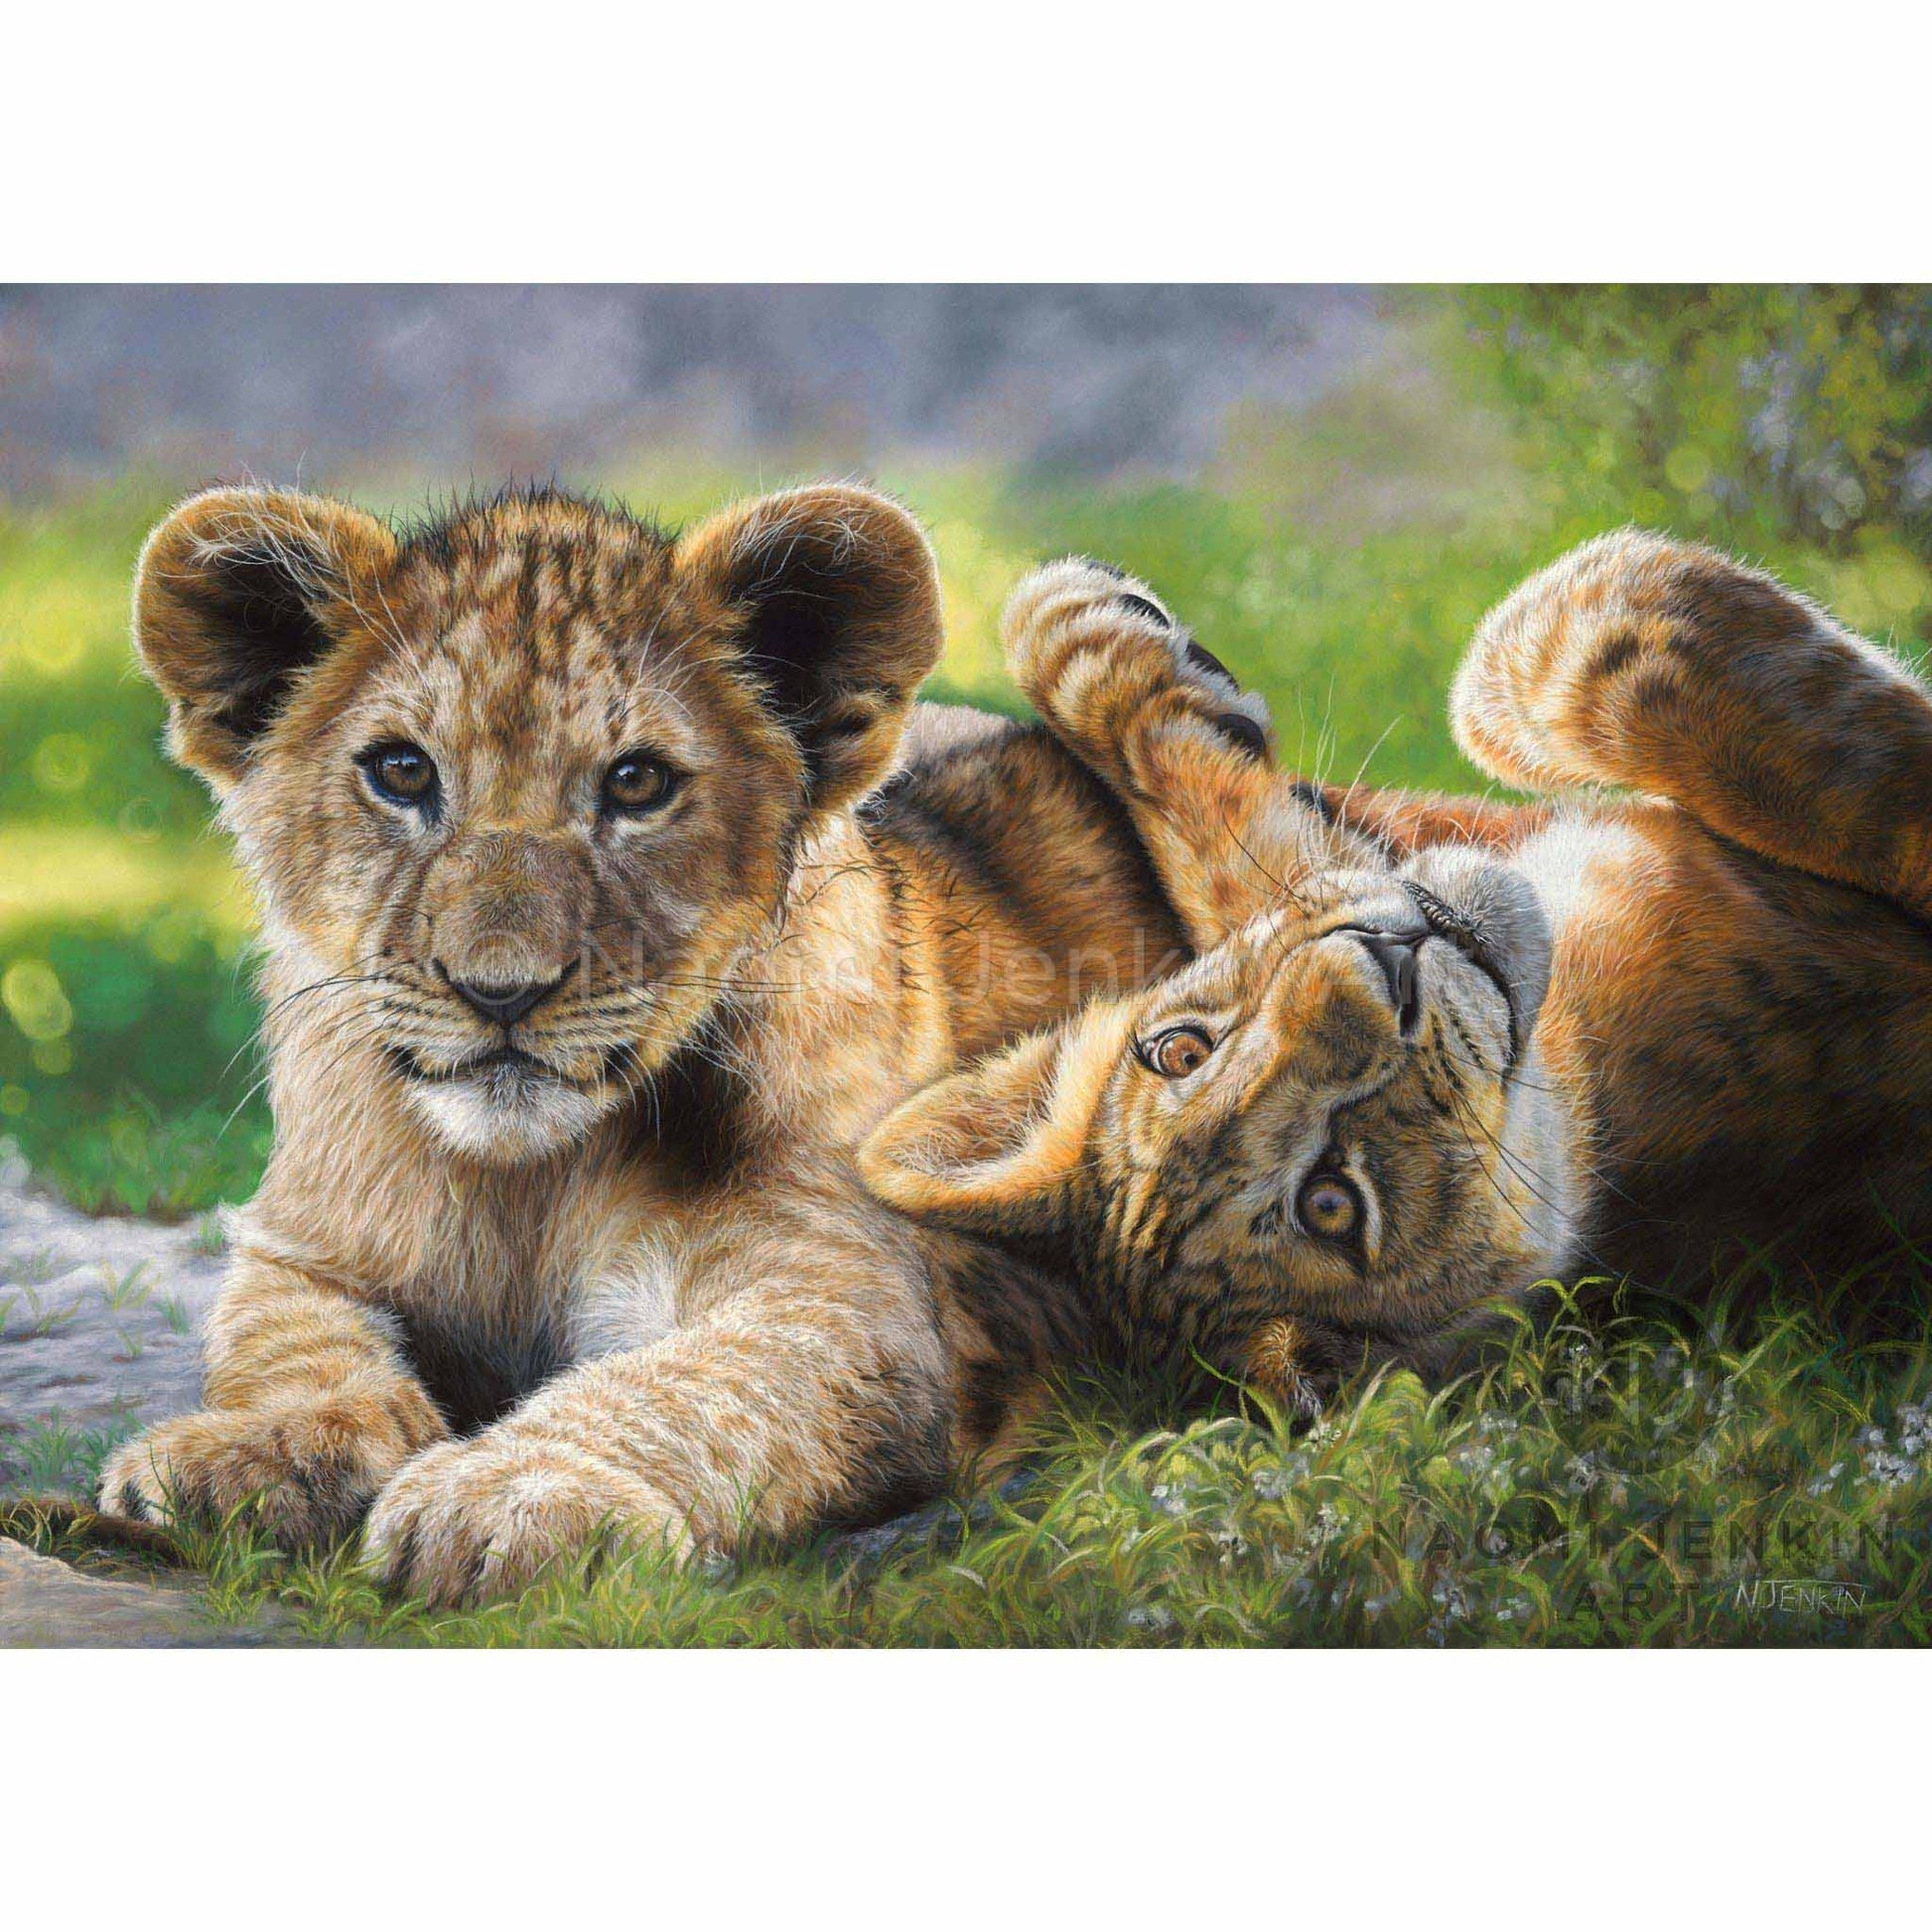 Lion art print including two playful lion cubs by wildlife artist Naomi Jenkin